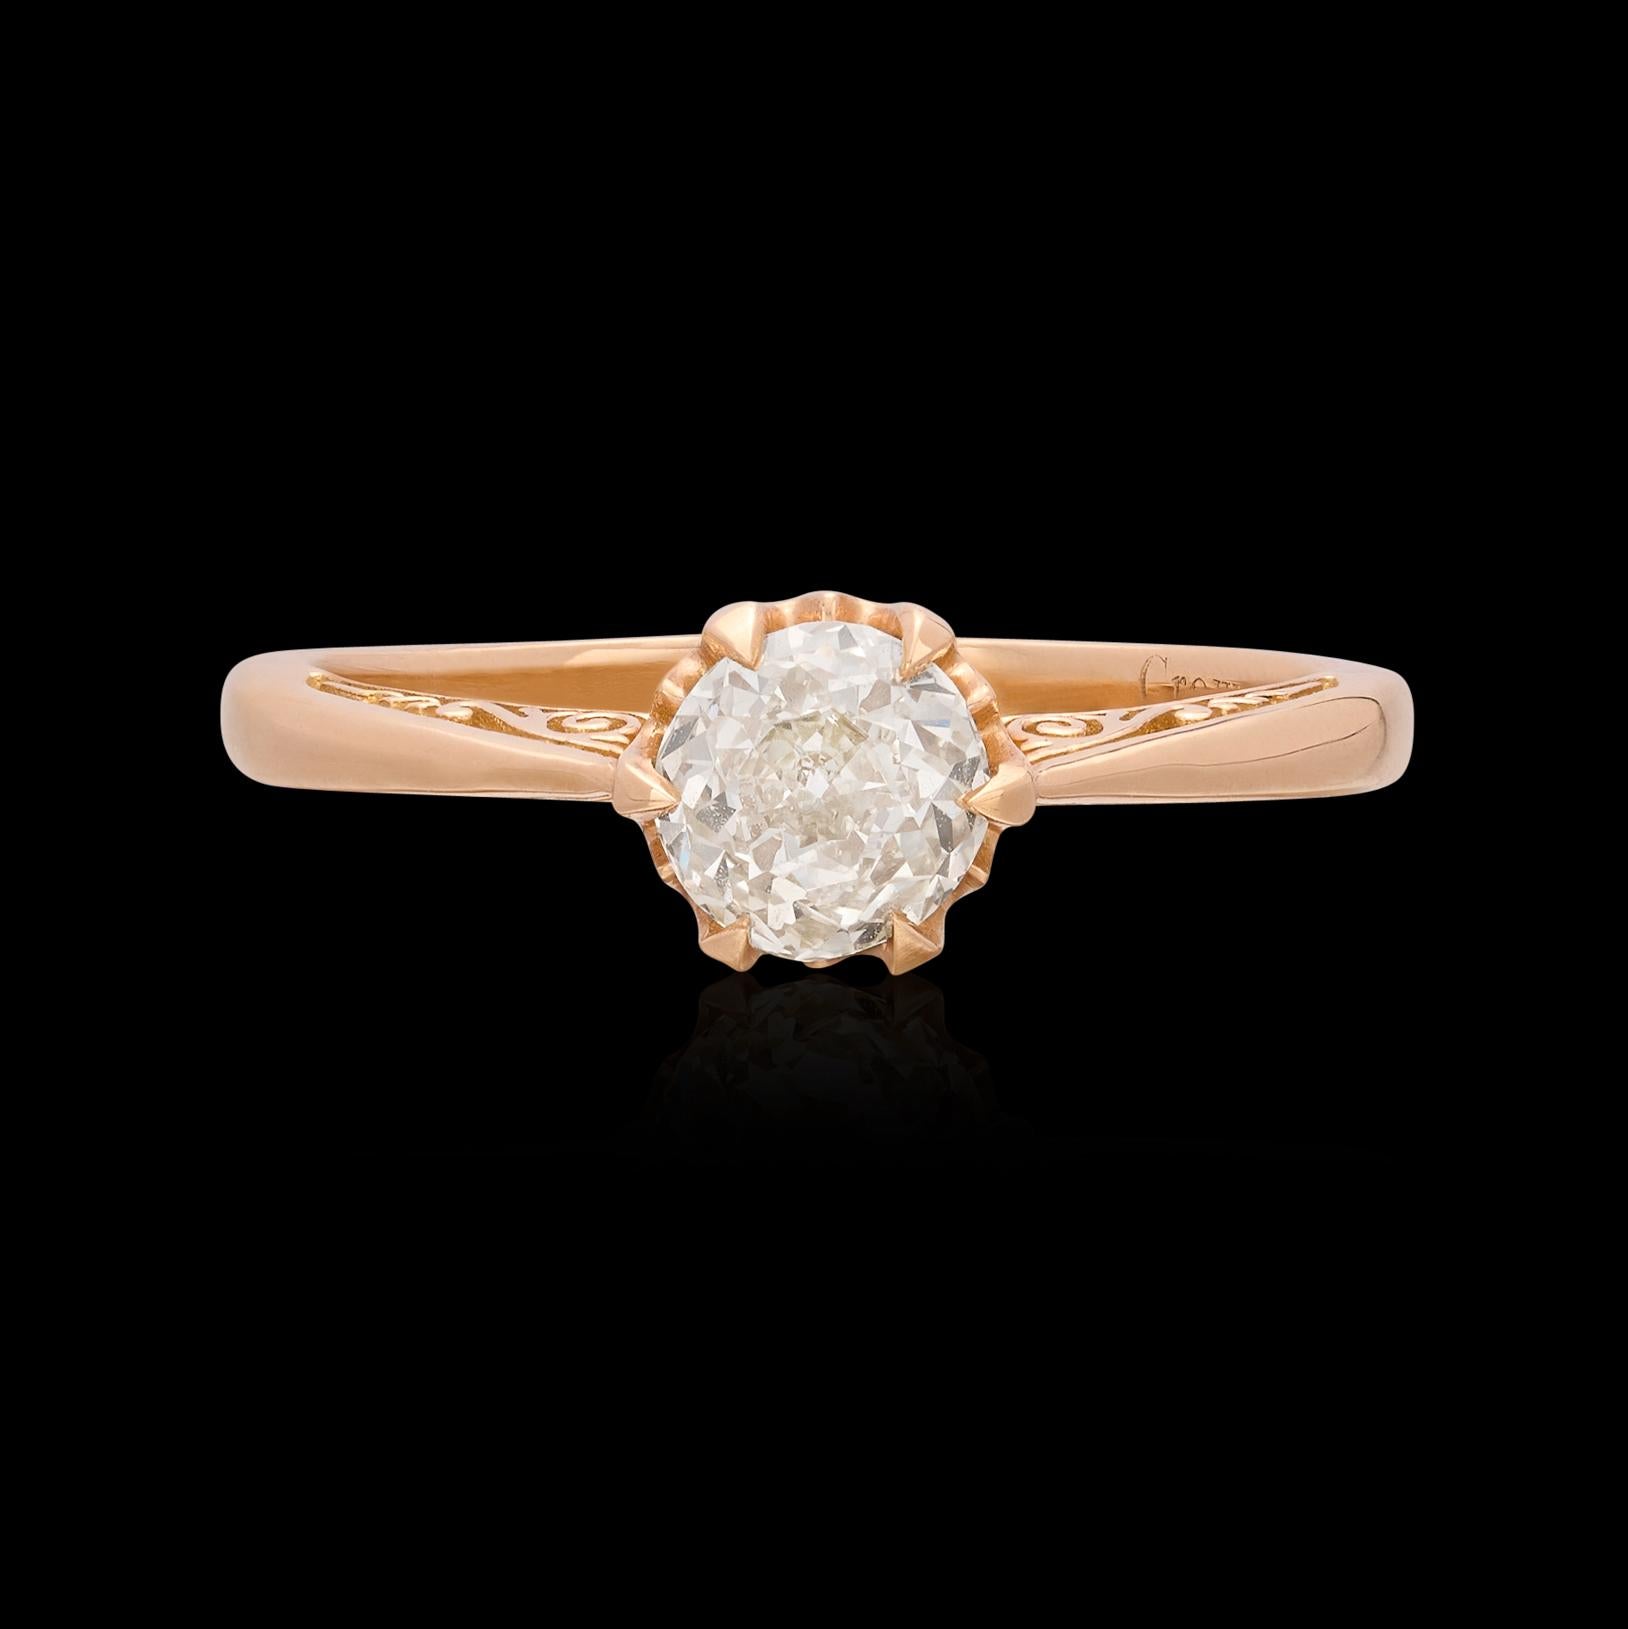 A truly elegant ring featuring a very special diamond. This 18 karat rose gold tulip inspired ring features a unique 0.70 carat GIA graded diamond as the centerpiece. As rare as it is beautiful, the center stone is a Crown Jubilee, a GIA recognized